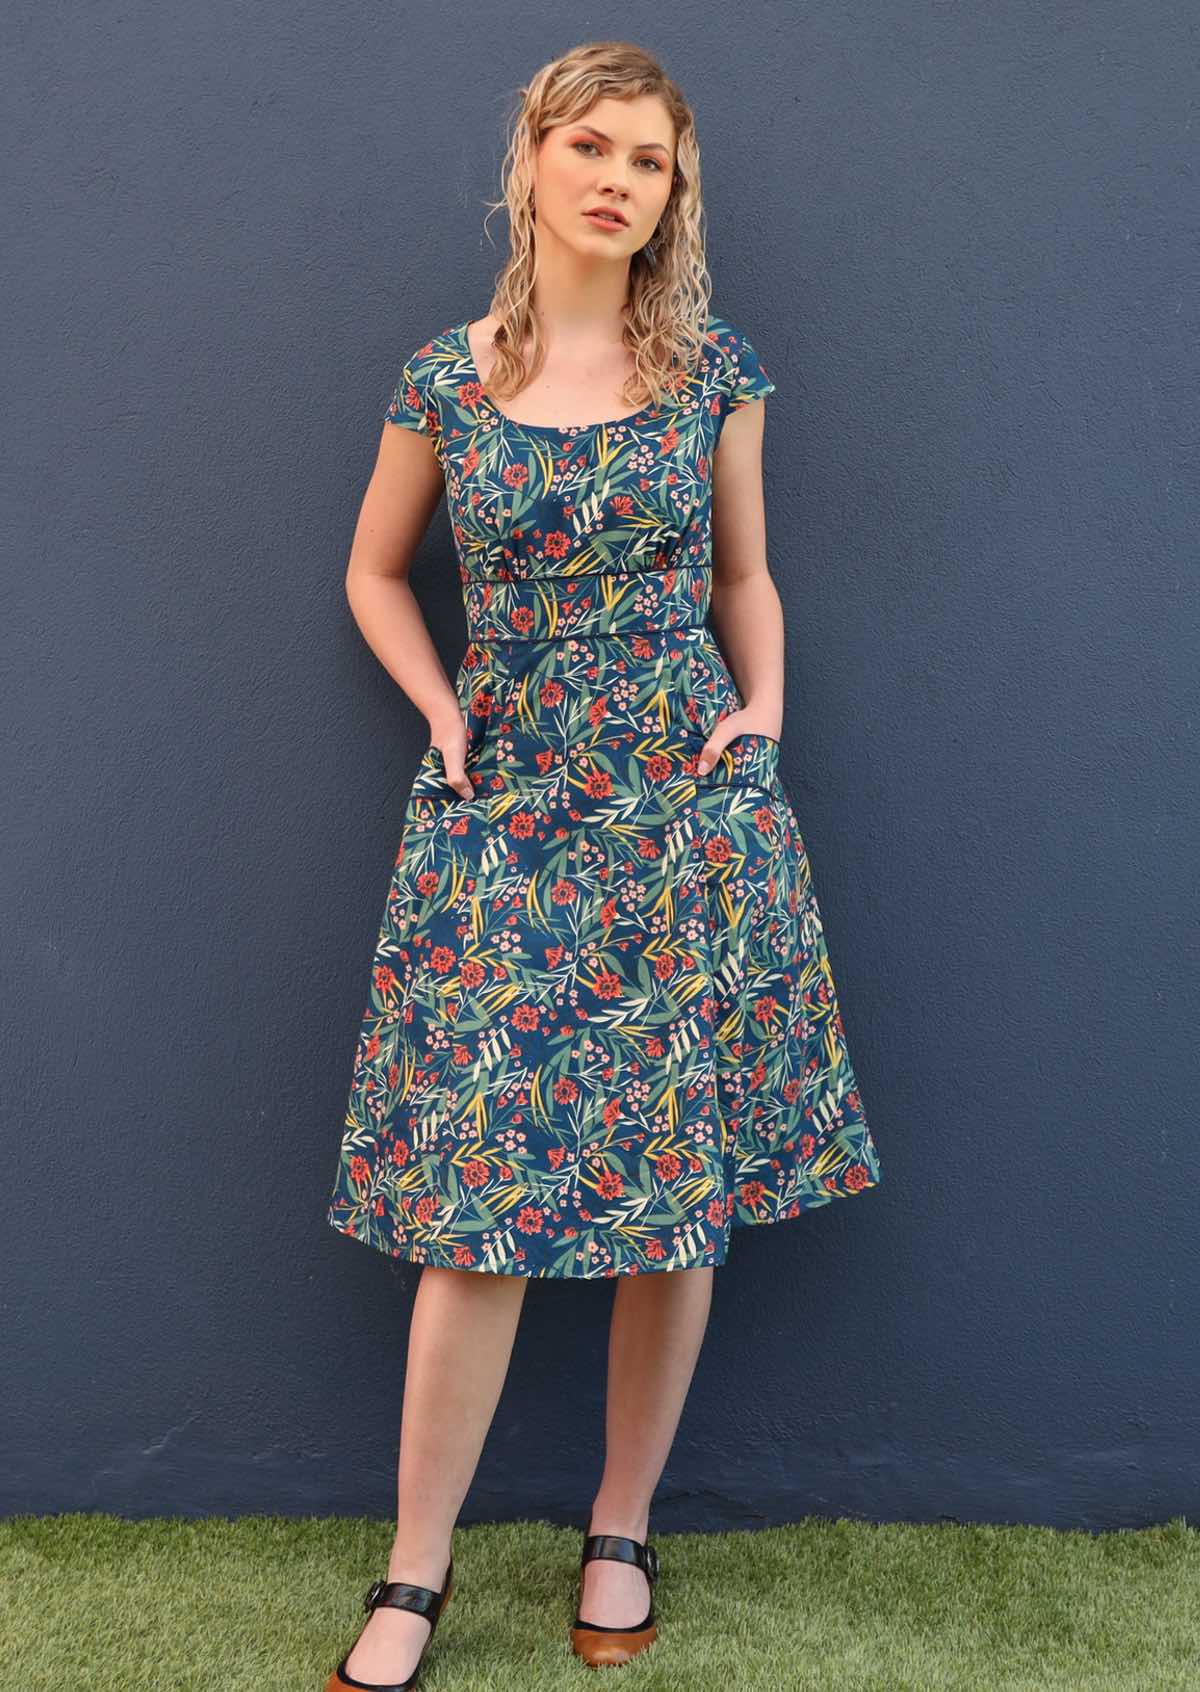 Model stands with her hands in the pockets of her retro style dress. 